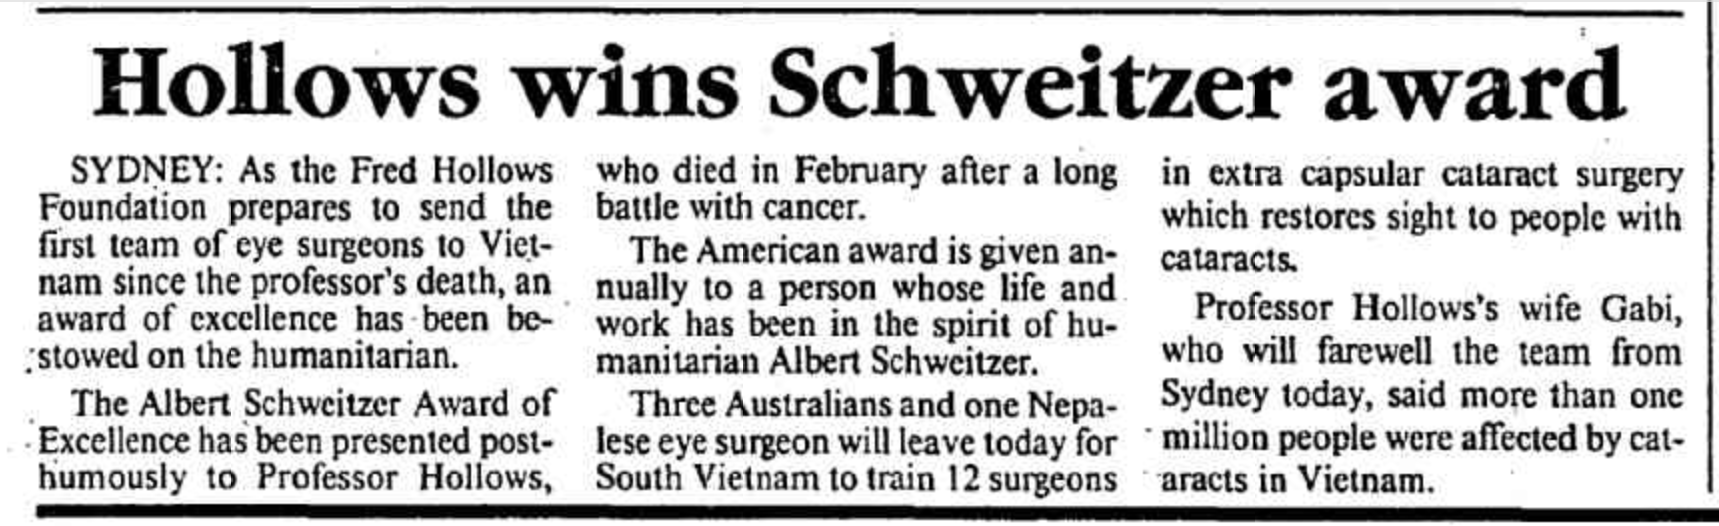 Article from 1993 which mentions Fred Hollows has won the Schweitzer award